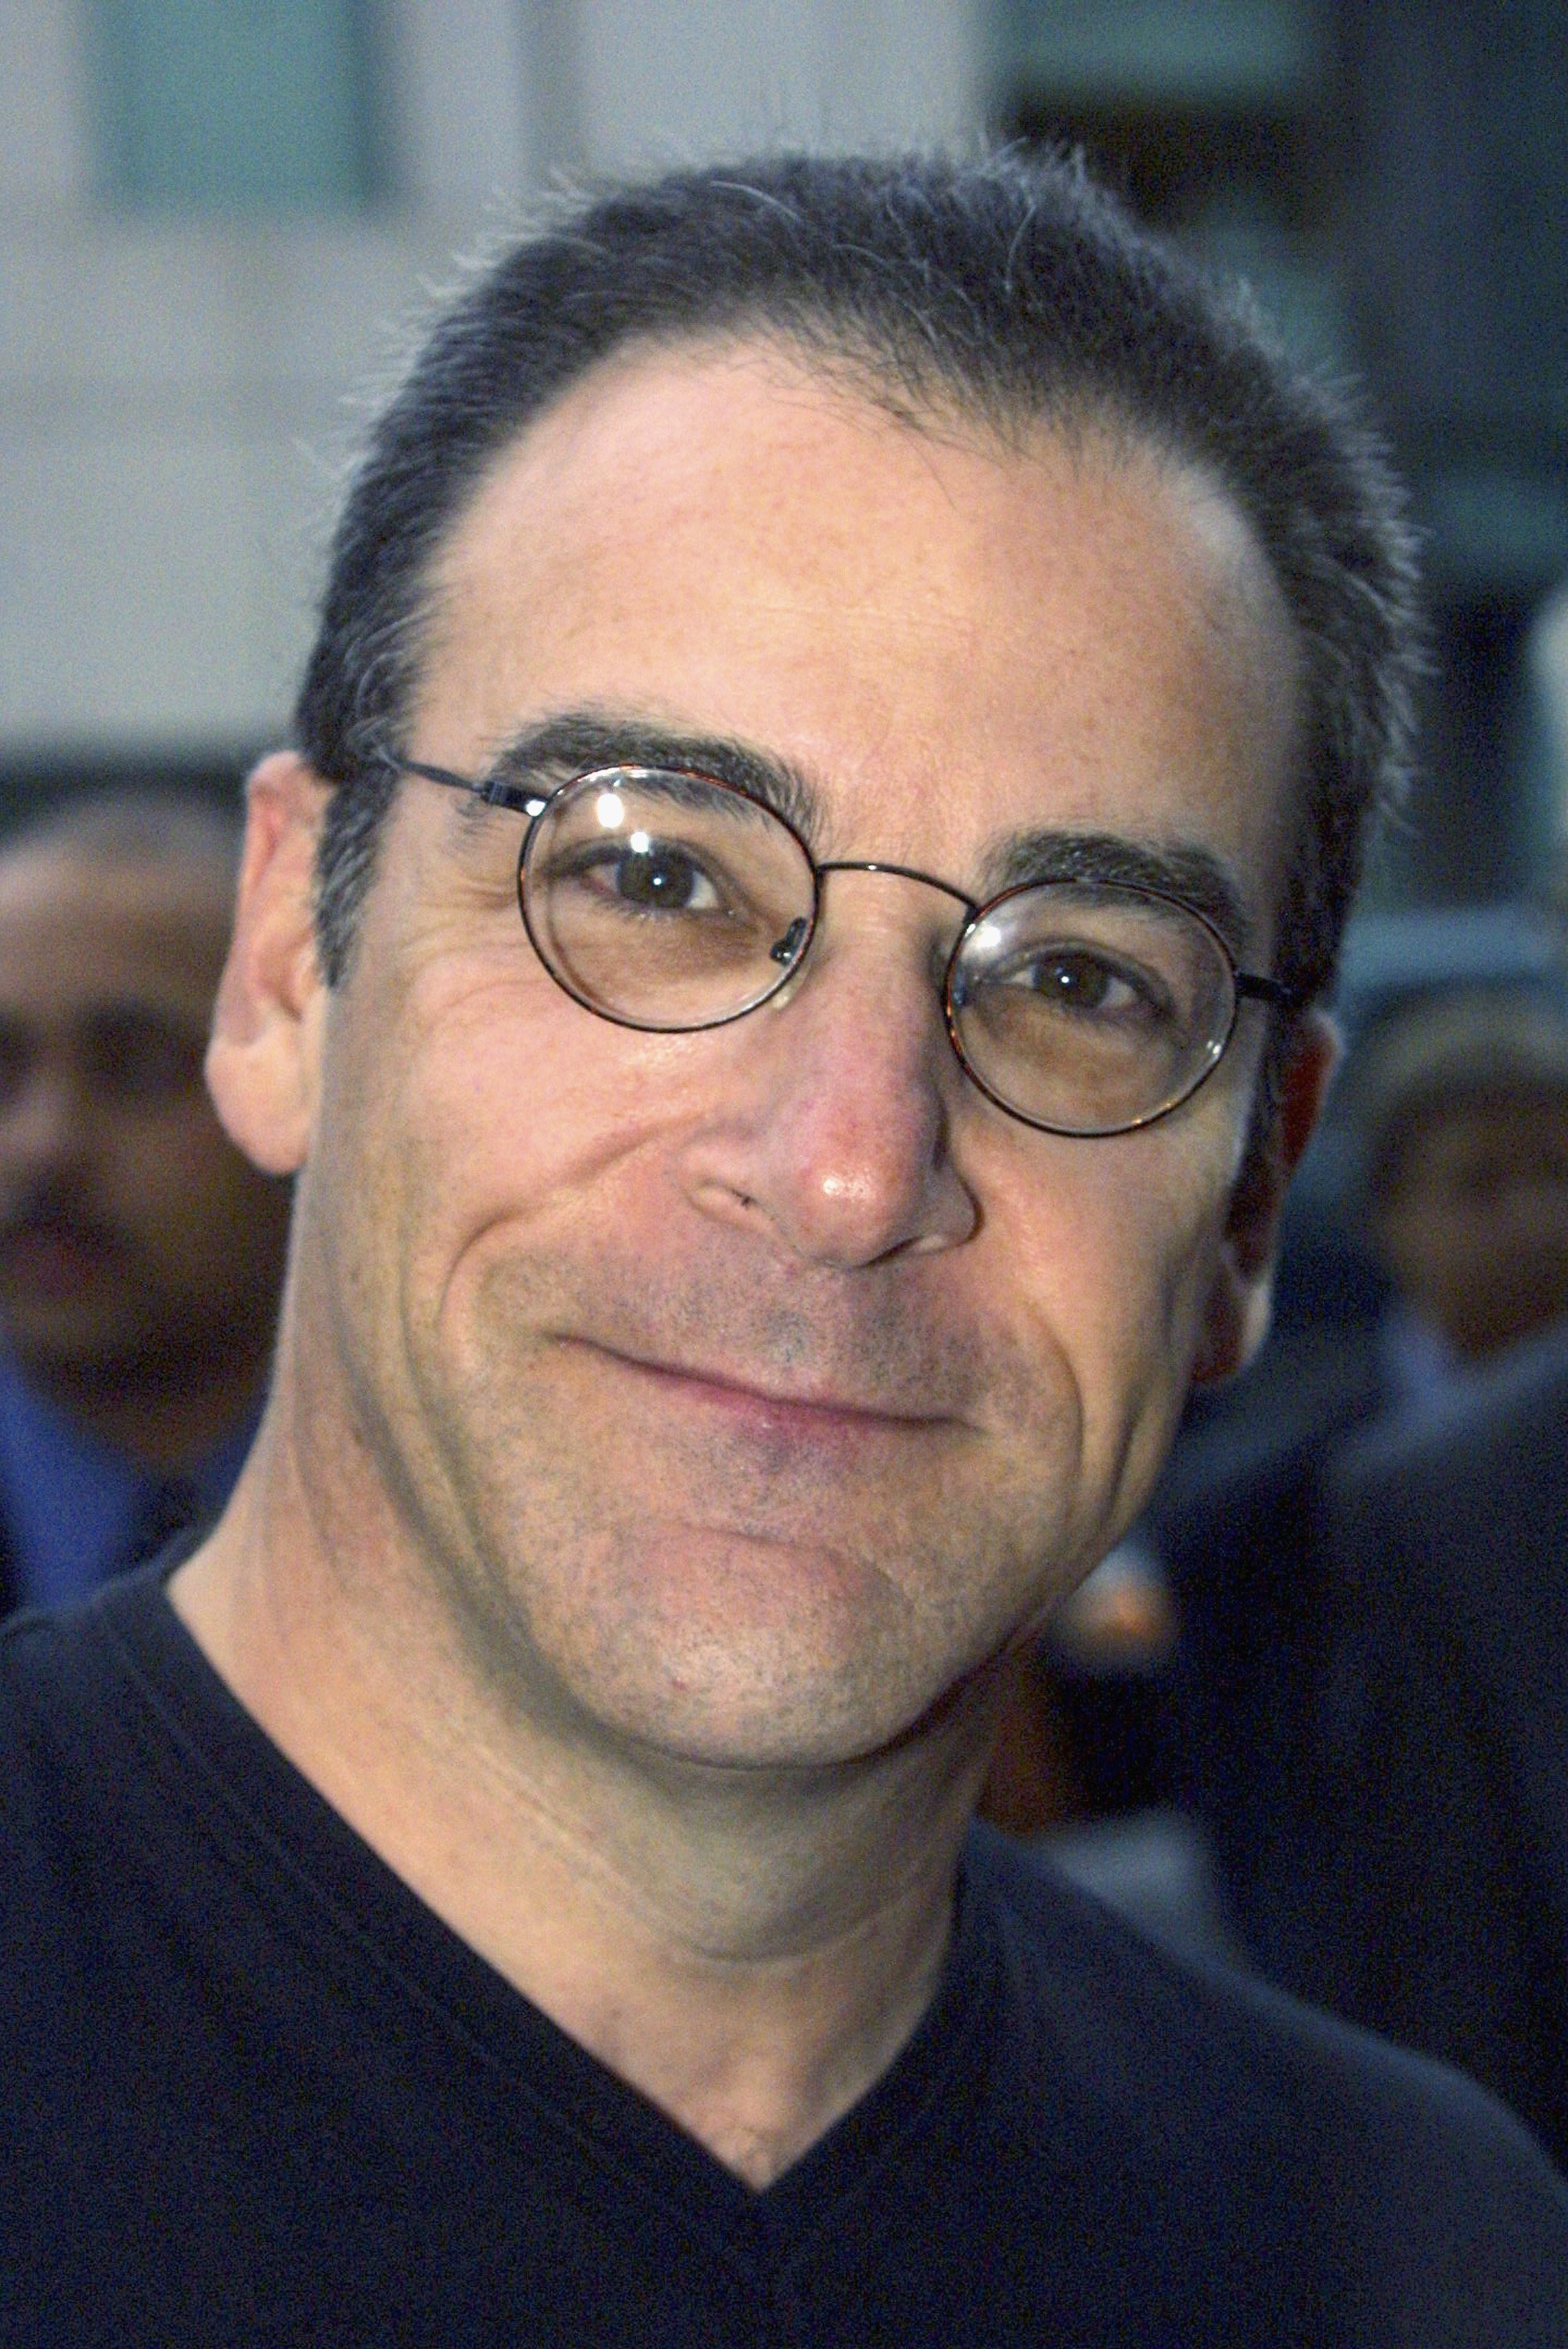 Mandy Patinkin, Premiere von "Dead Like Me", Academy of Motion Pictures Arts and Sciences, 2003 | Quelle: Getty Images